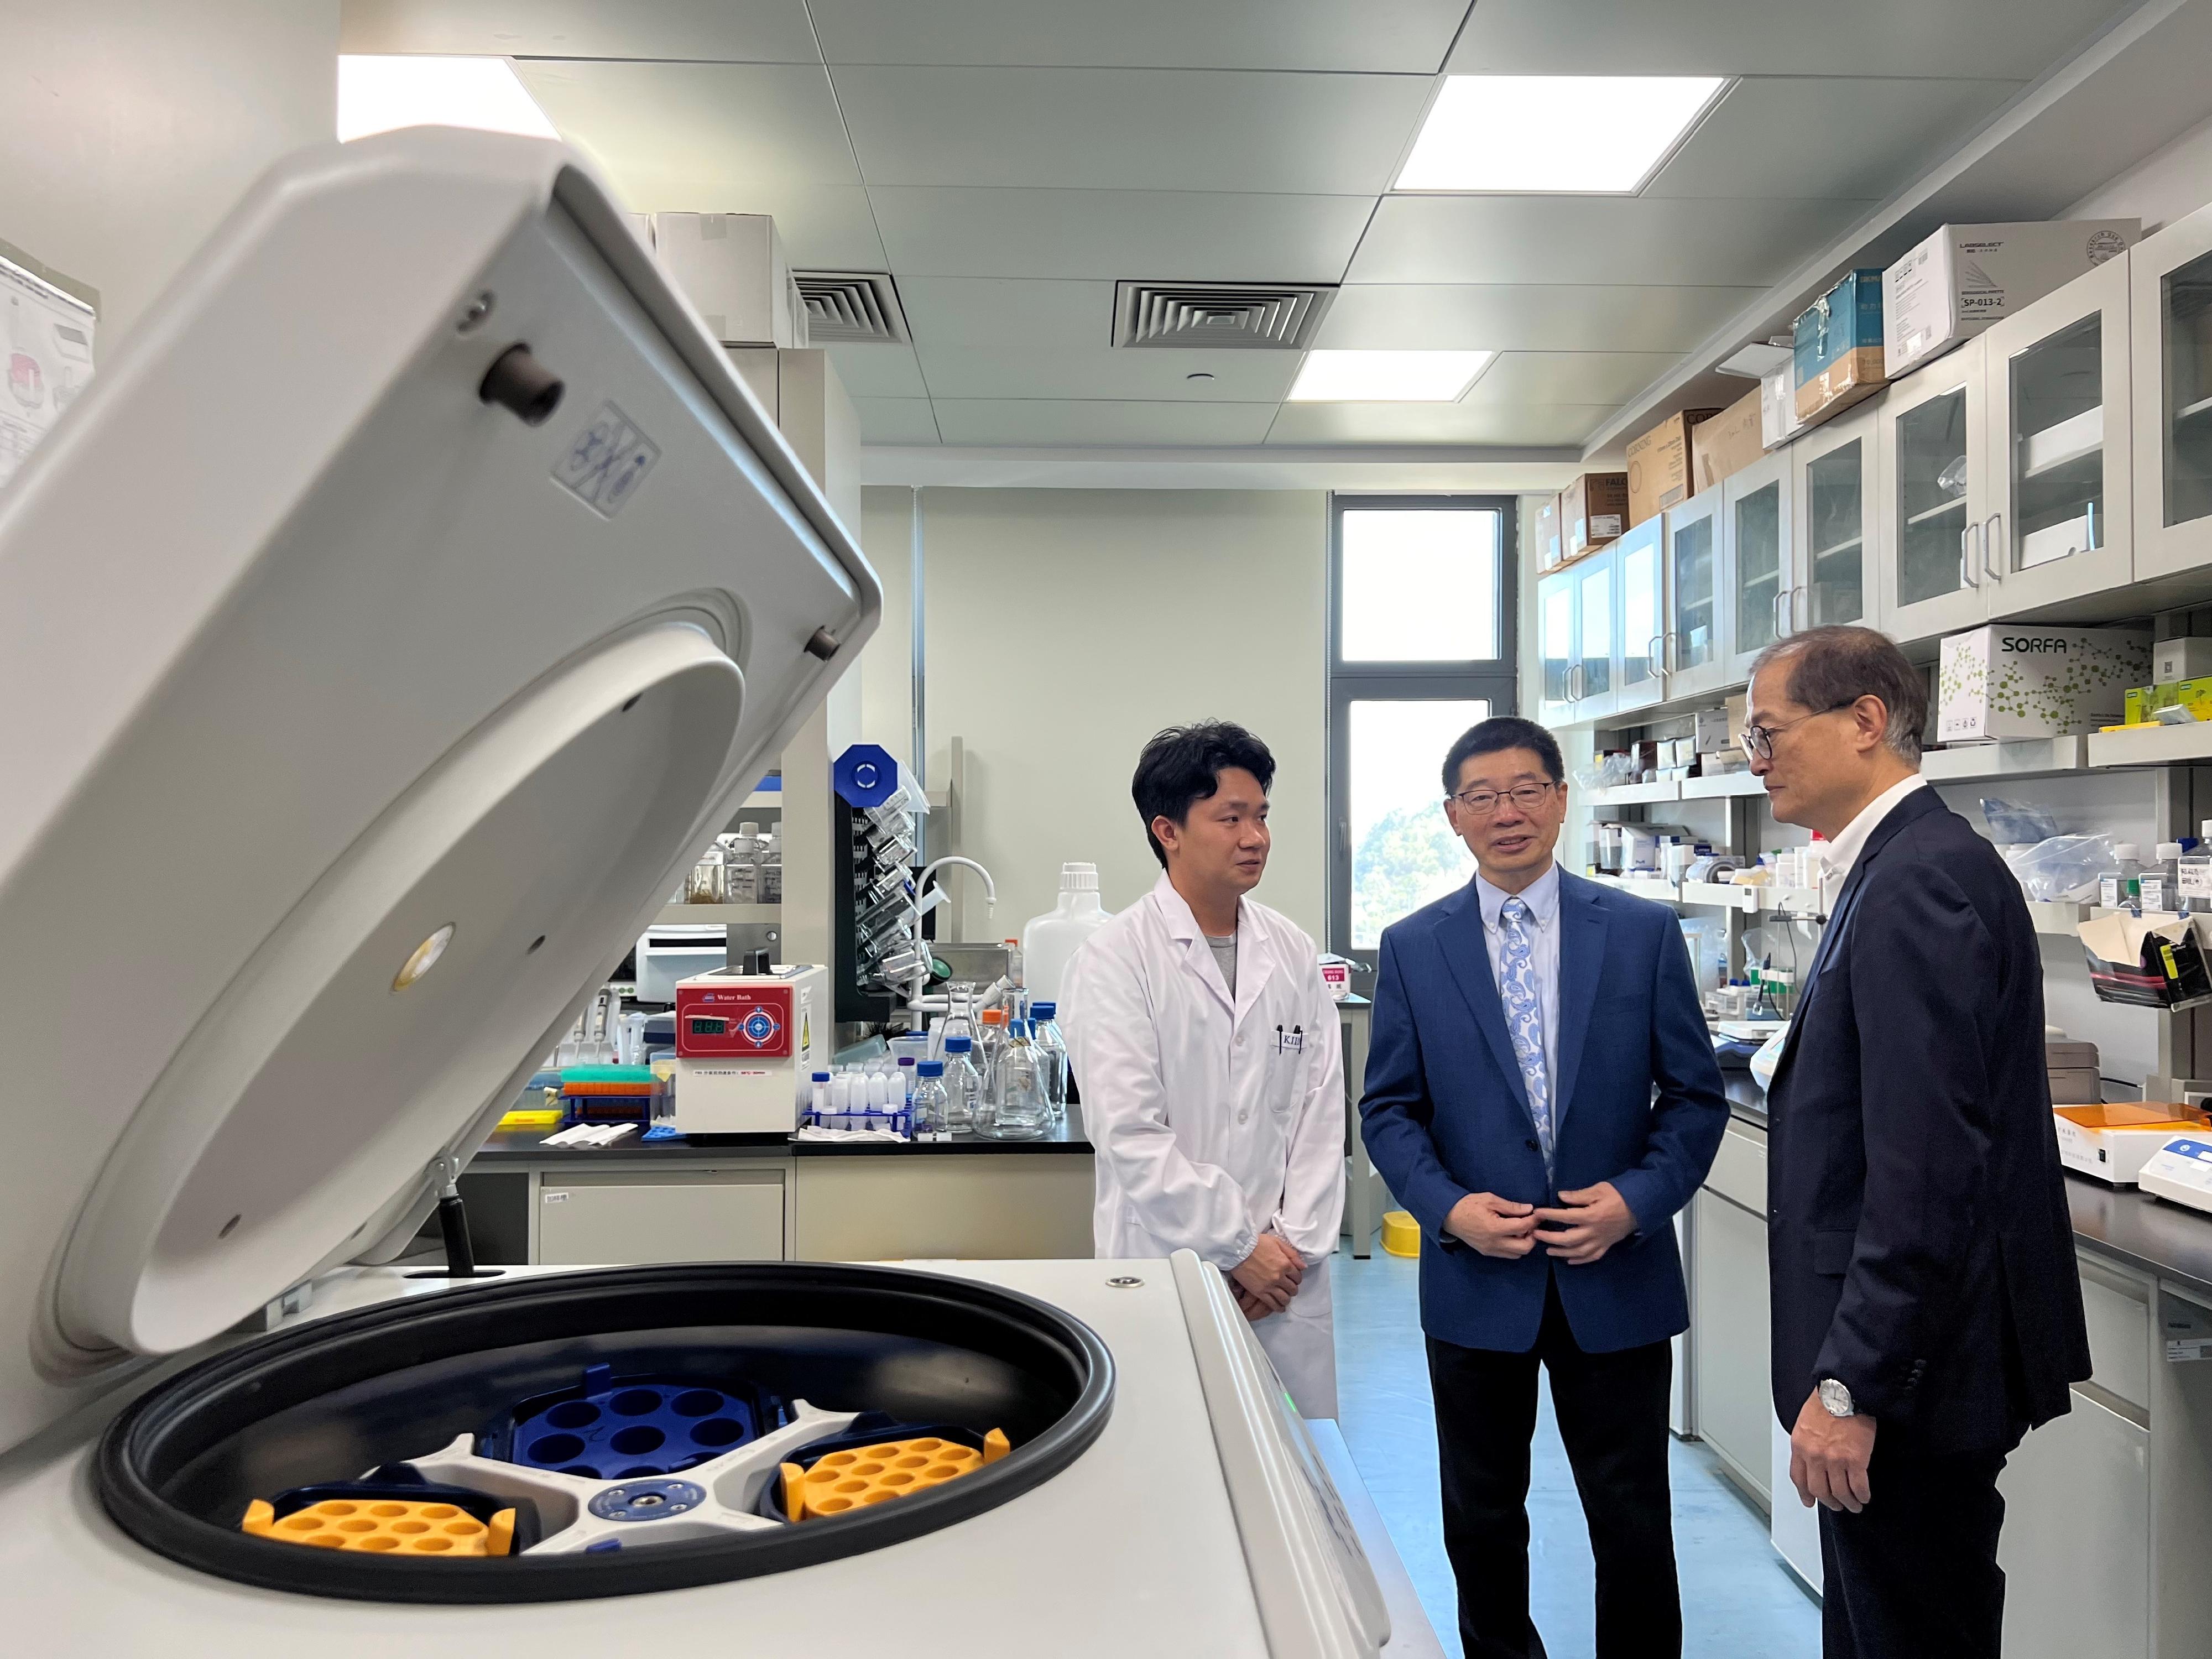 The Secretary for Health, Professor Lo Chung-mau (right), visits a laboratory at the School of Medicine of the Chinese University of Hong Kong, Shenzhen, in the company of staff members of the School today (January 19).